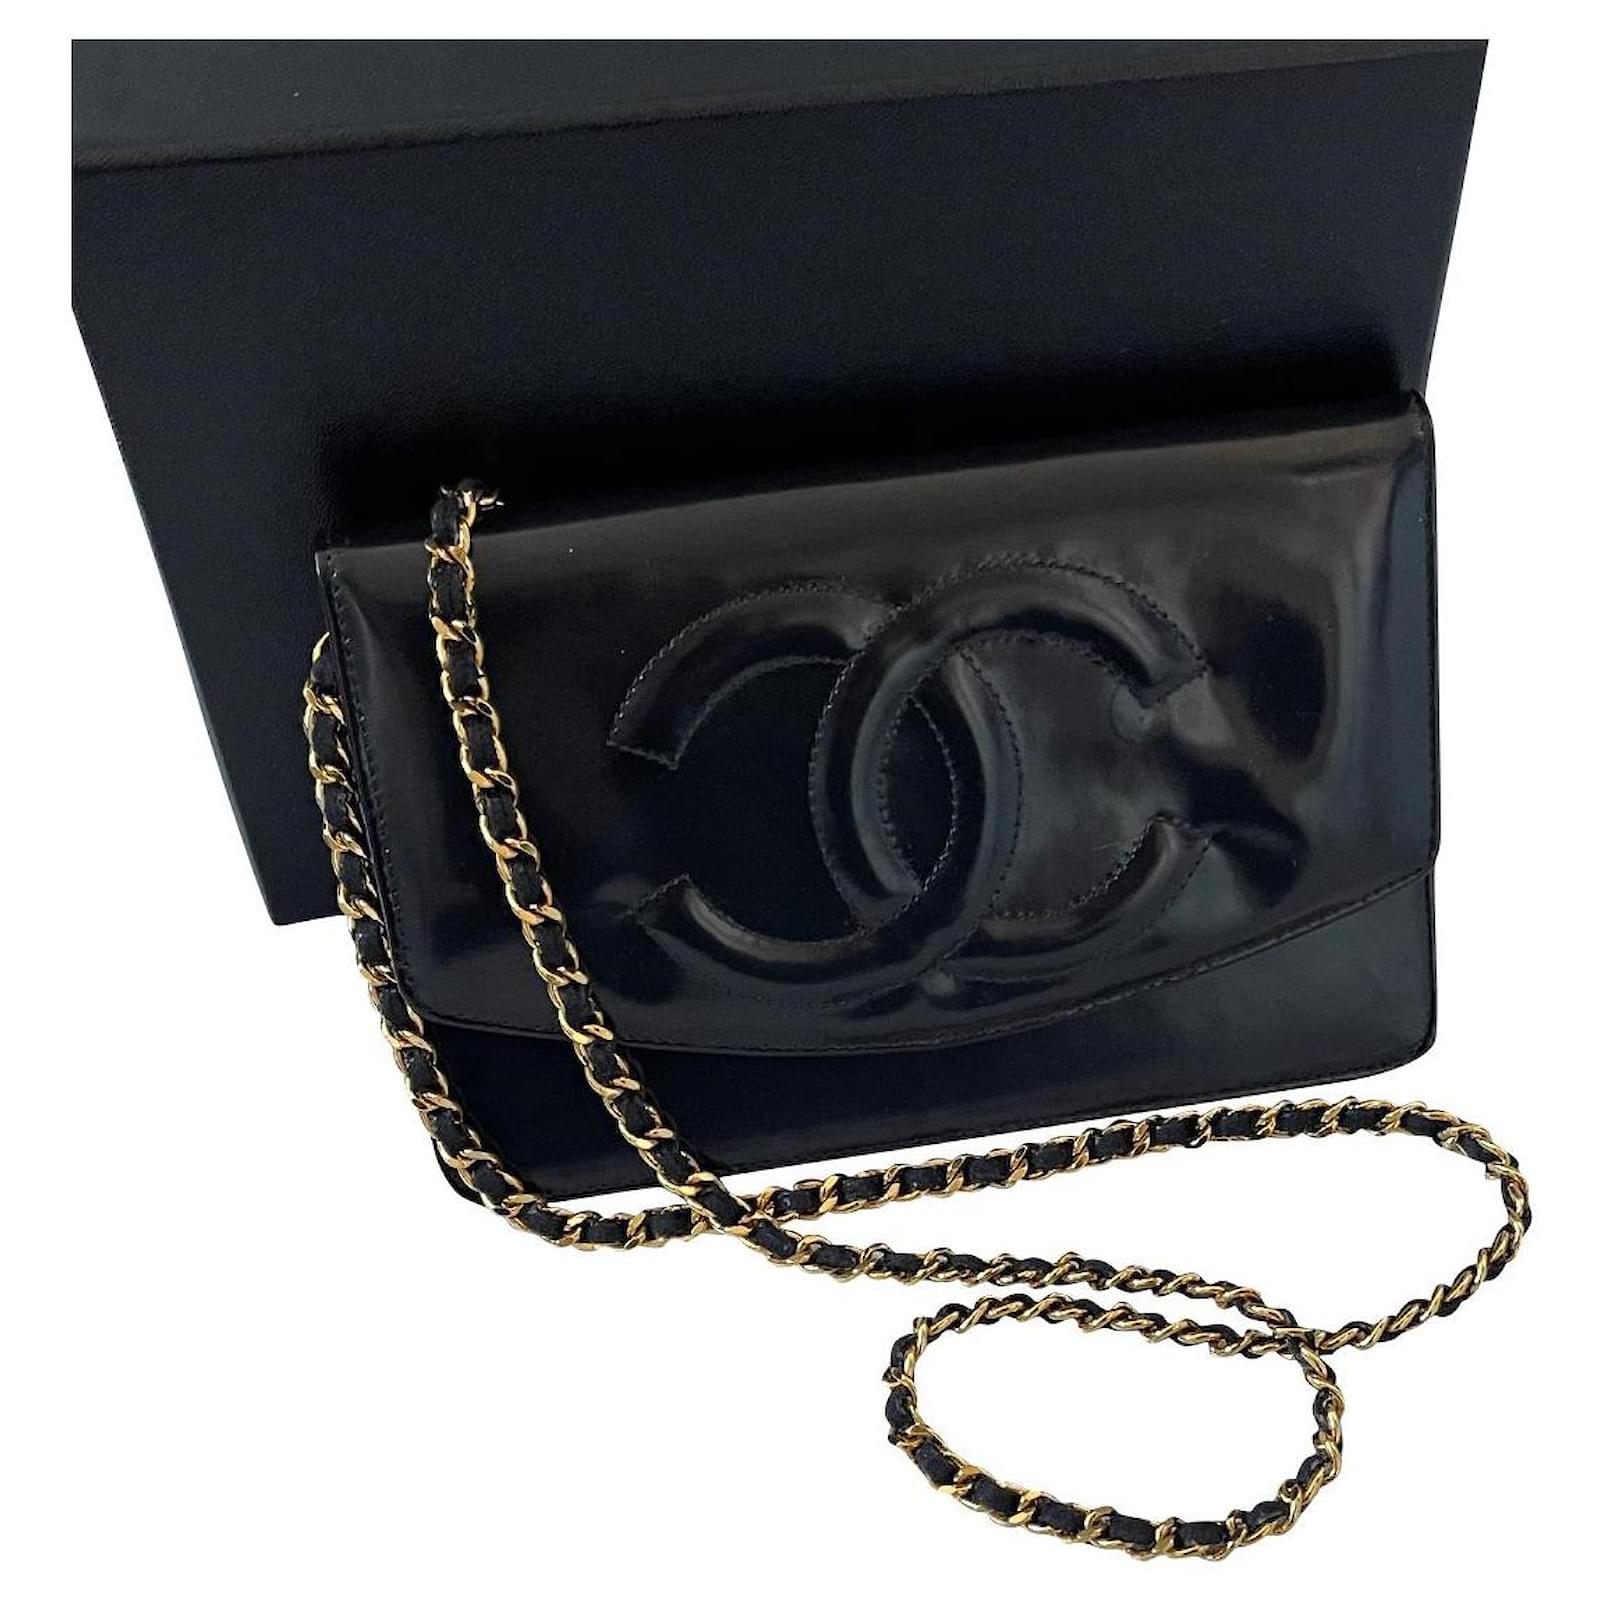 Vintage Chanel Wallet on Chain in Black Patented Leather